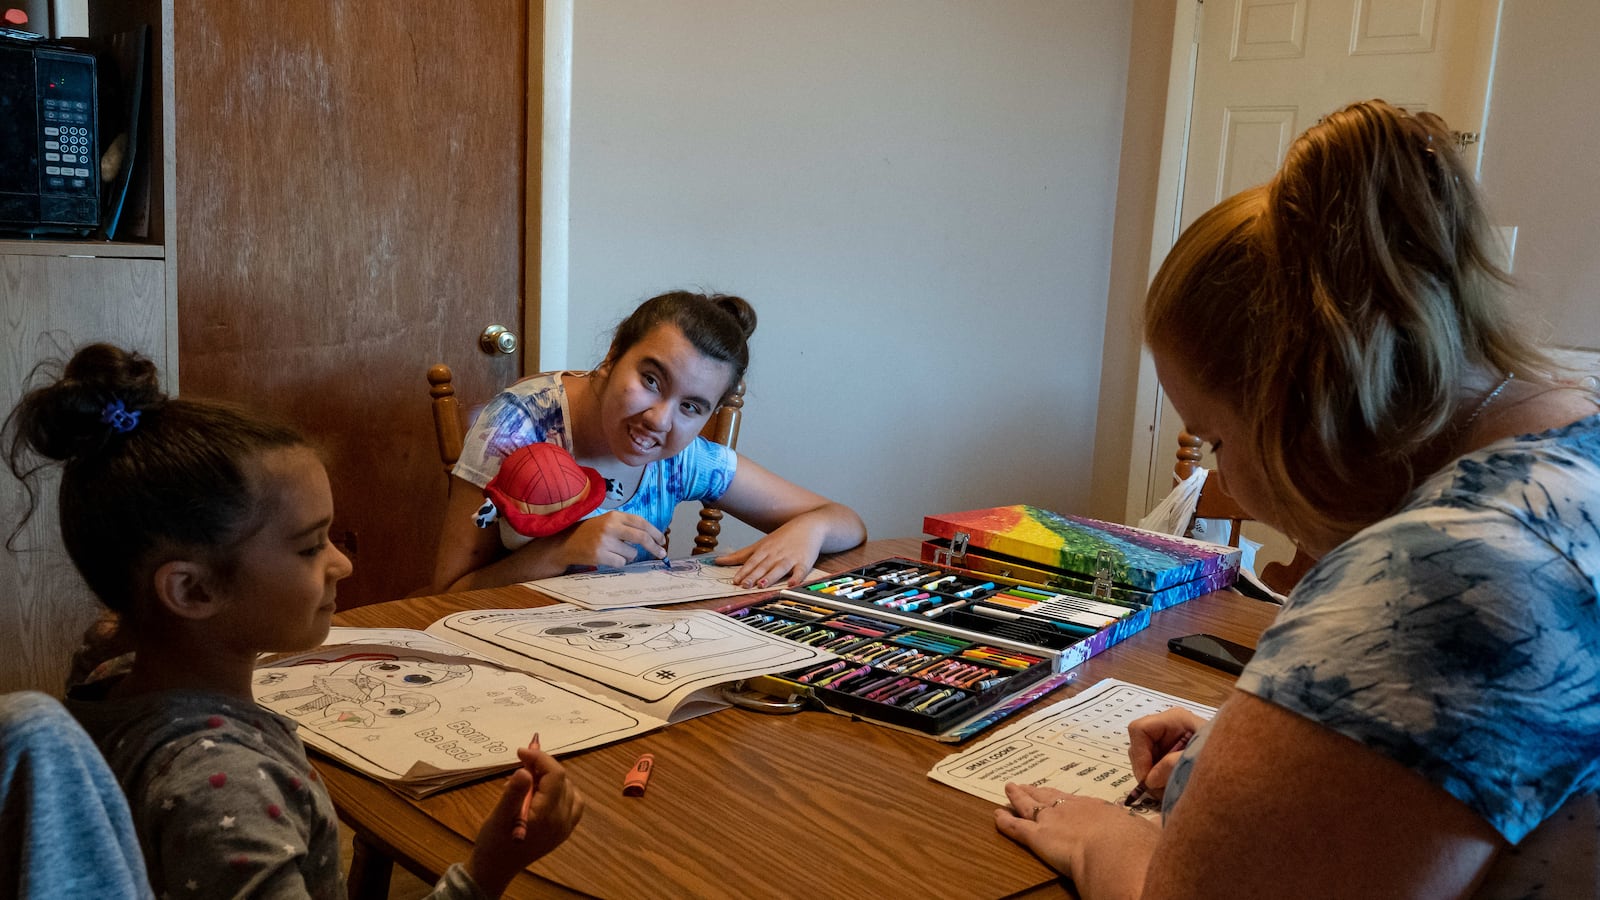 Two girls and a woman color in coloring books together at a dining room table.